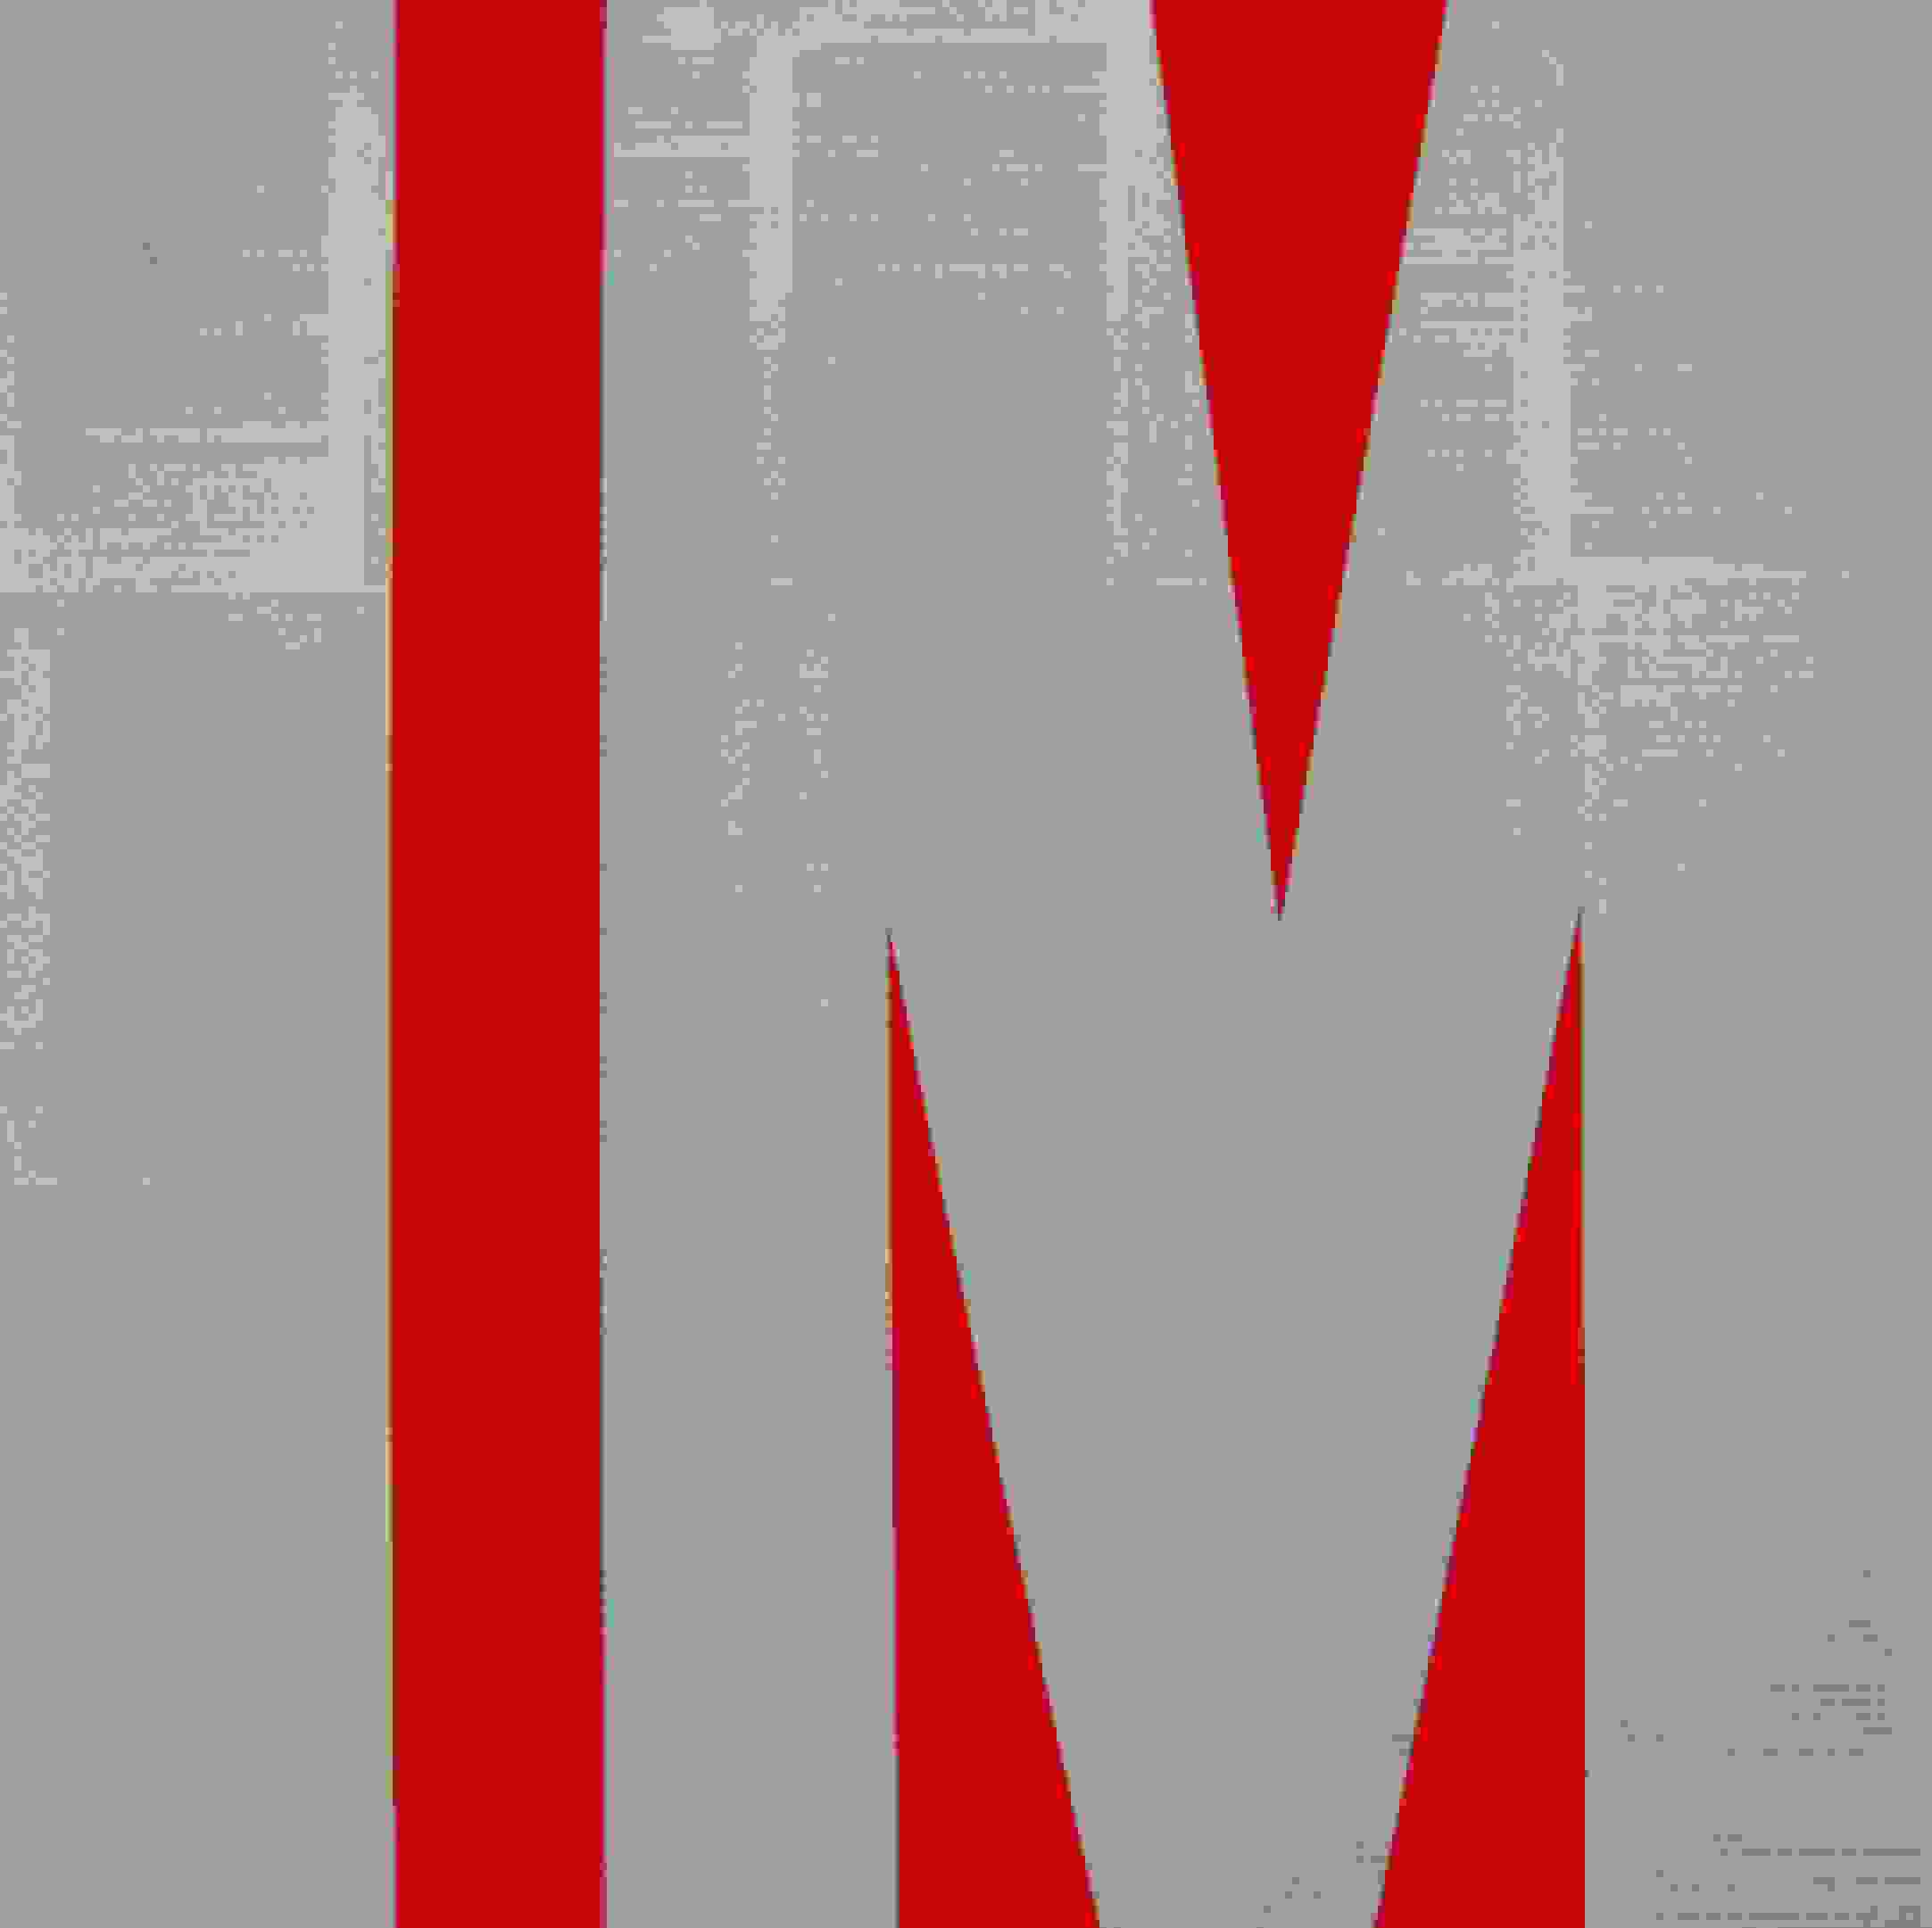 An artwork by Tim Rollins and K.O.S.  entitled "Invisible Man (after Ralph Ellison), 2014". The artwork shows the letters "I" and "M" with pages of Ralph Ellison's Invisible Man filled on the inside of the letters. The background is a solid bright red color.